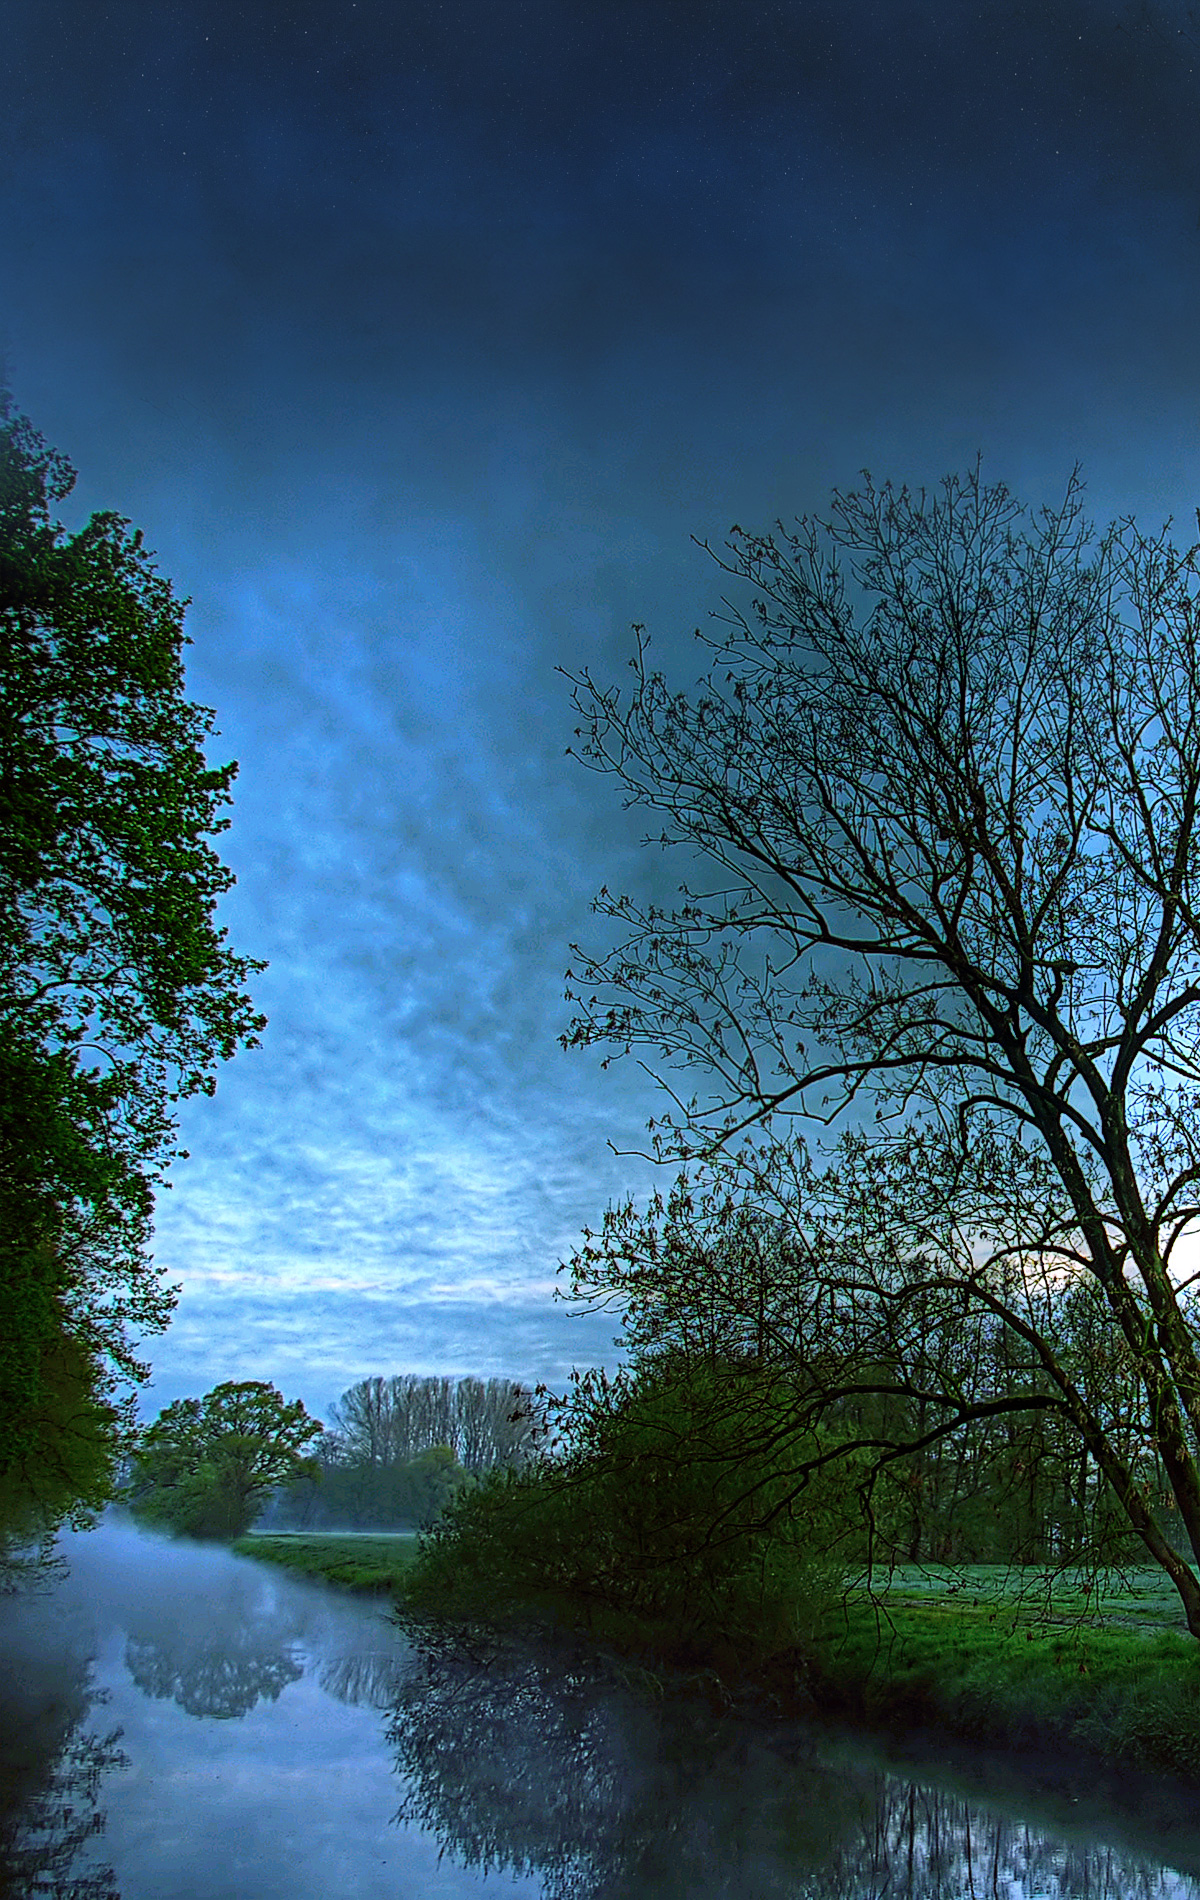 Treelined river at sunset under blue sky and clouds portrait photo